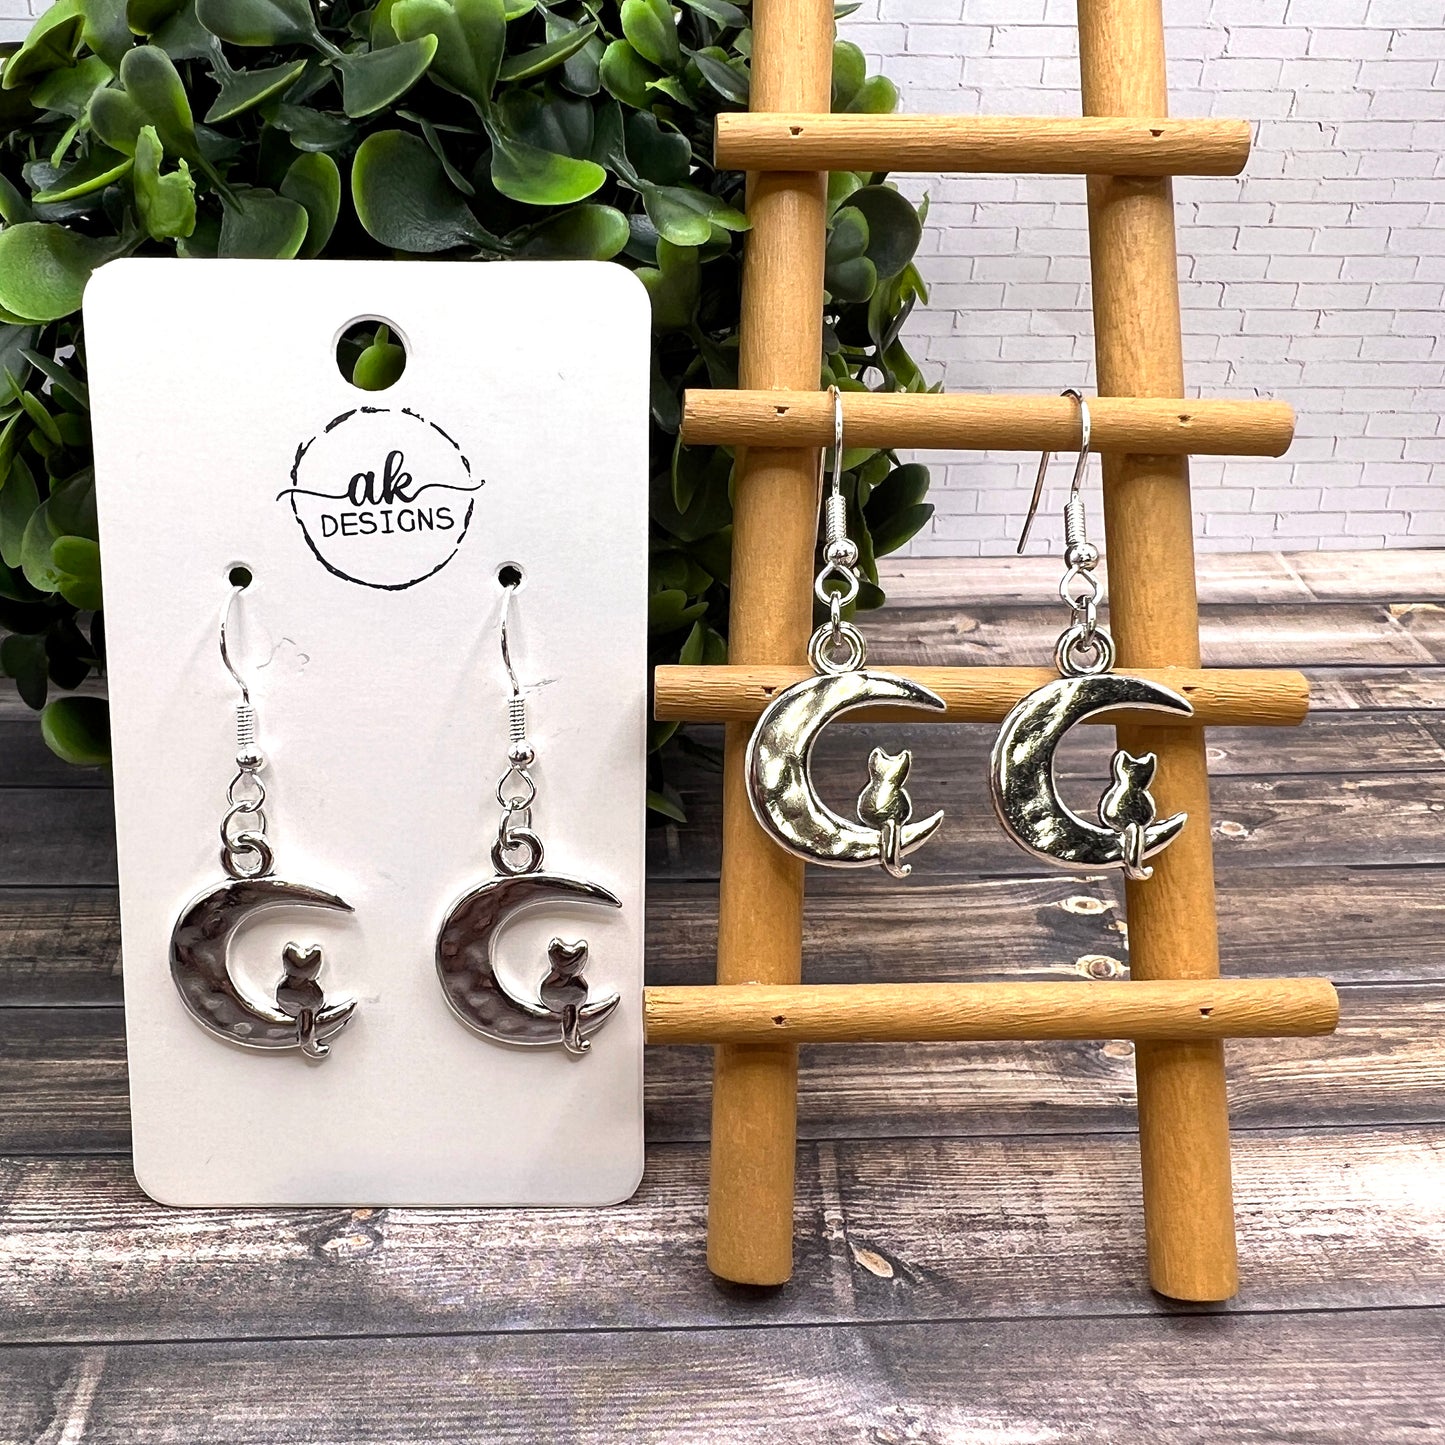 Silver Cat and Moon  Earrings Petite Lightweight Hypoallergenic Hooks, Option for Sterling Silver Hooks Available